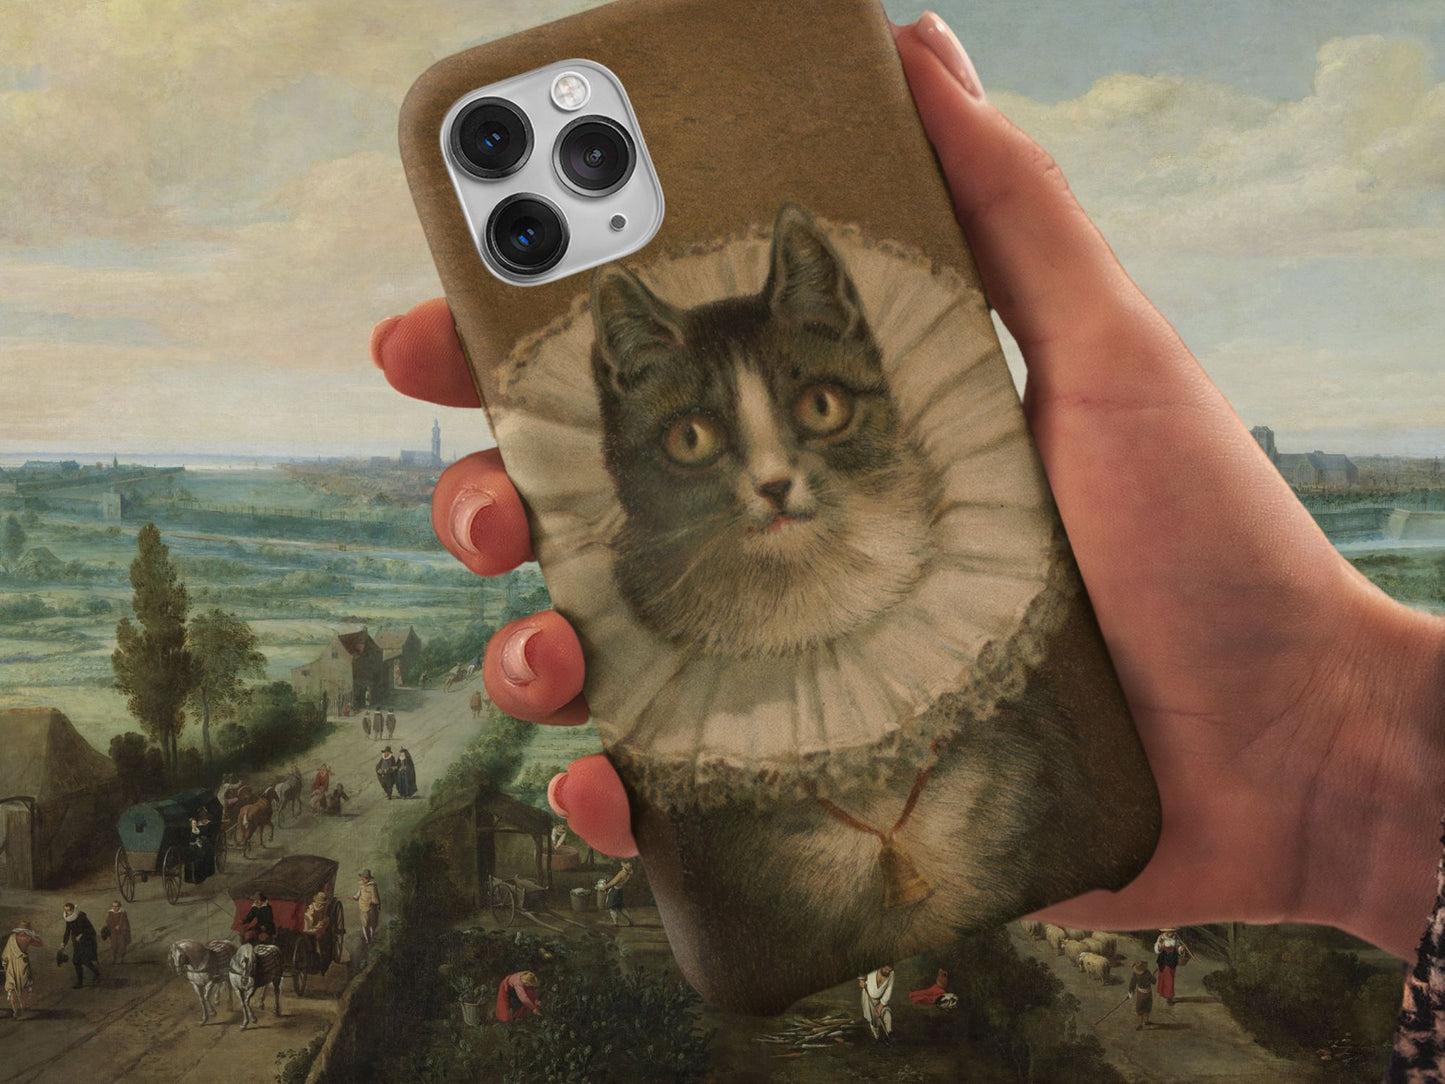 The Widow Cat with Collar iPhone case